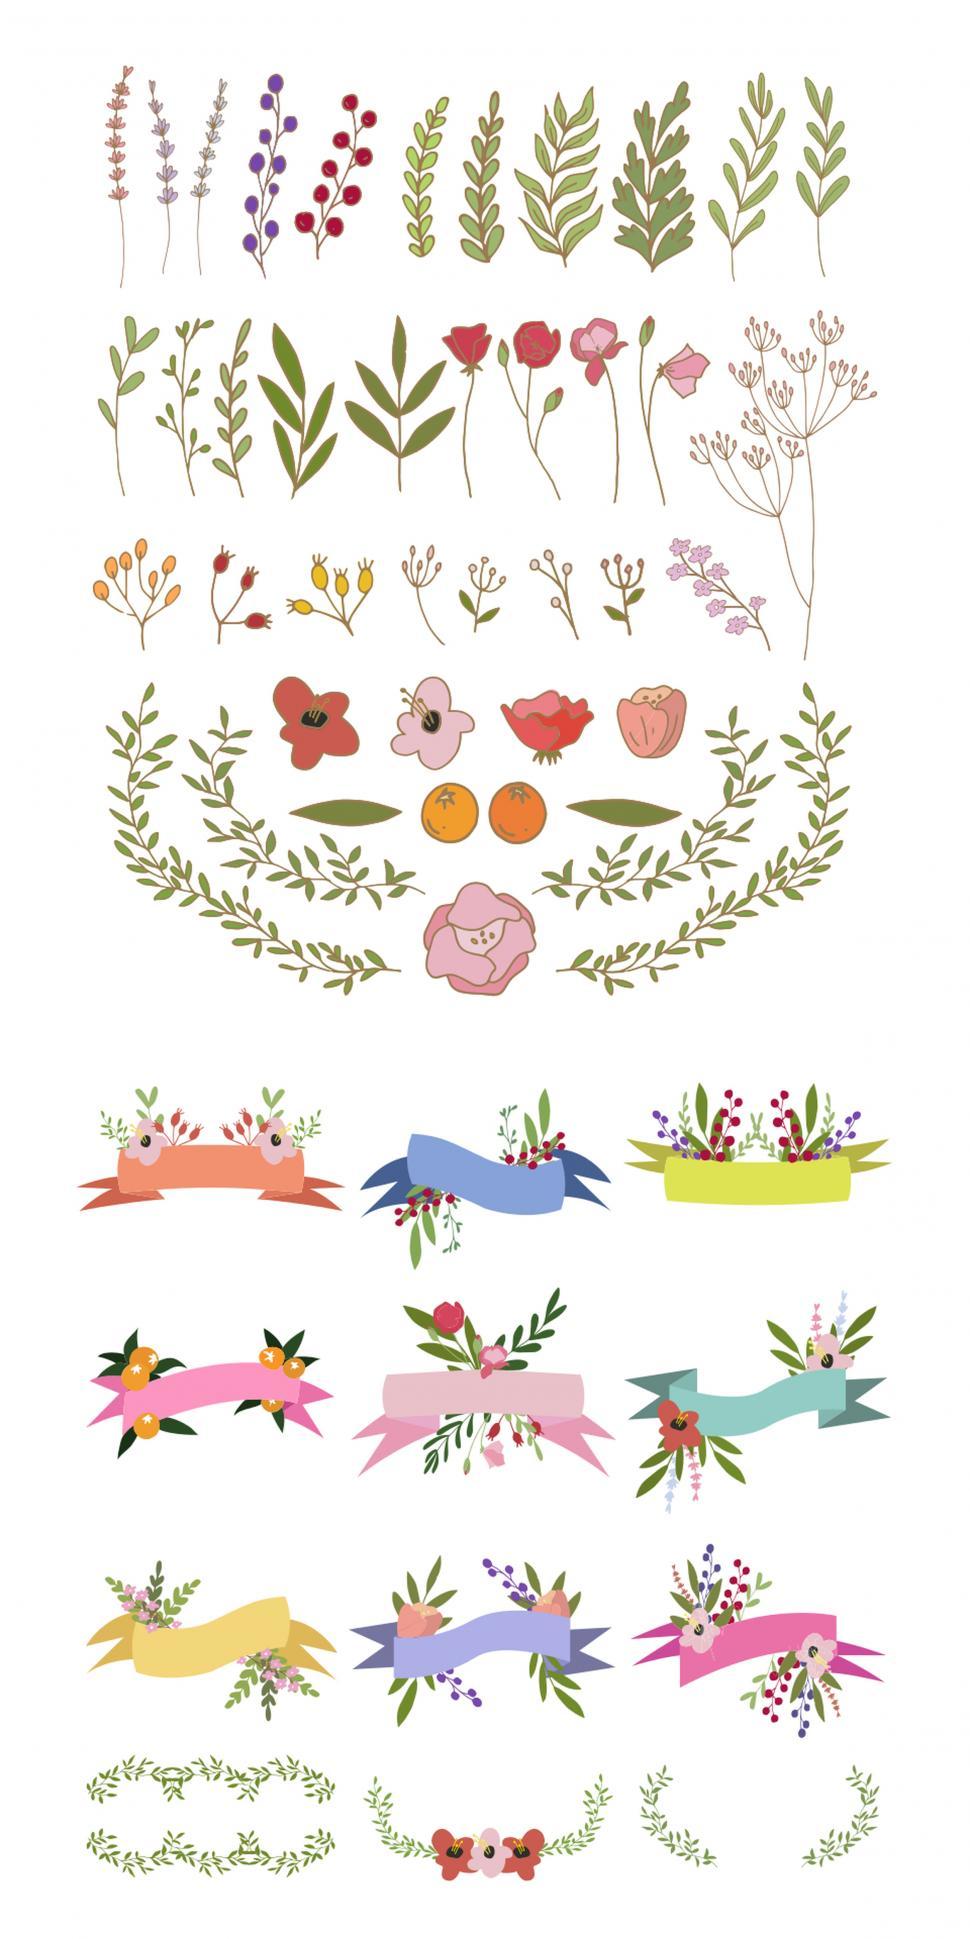 Free Image of A collection flower and ribbon banners vector icons 